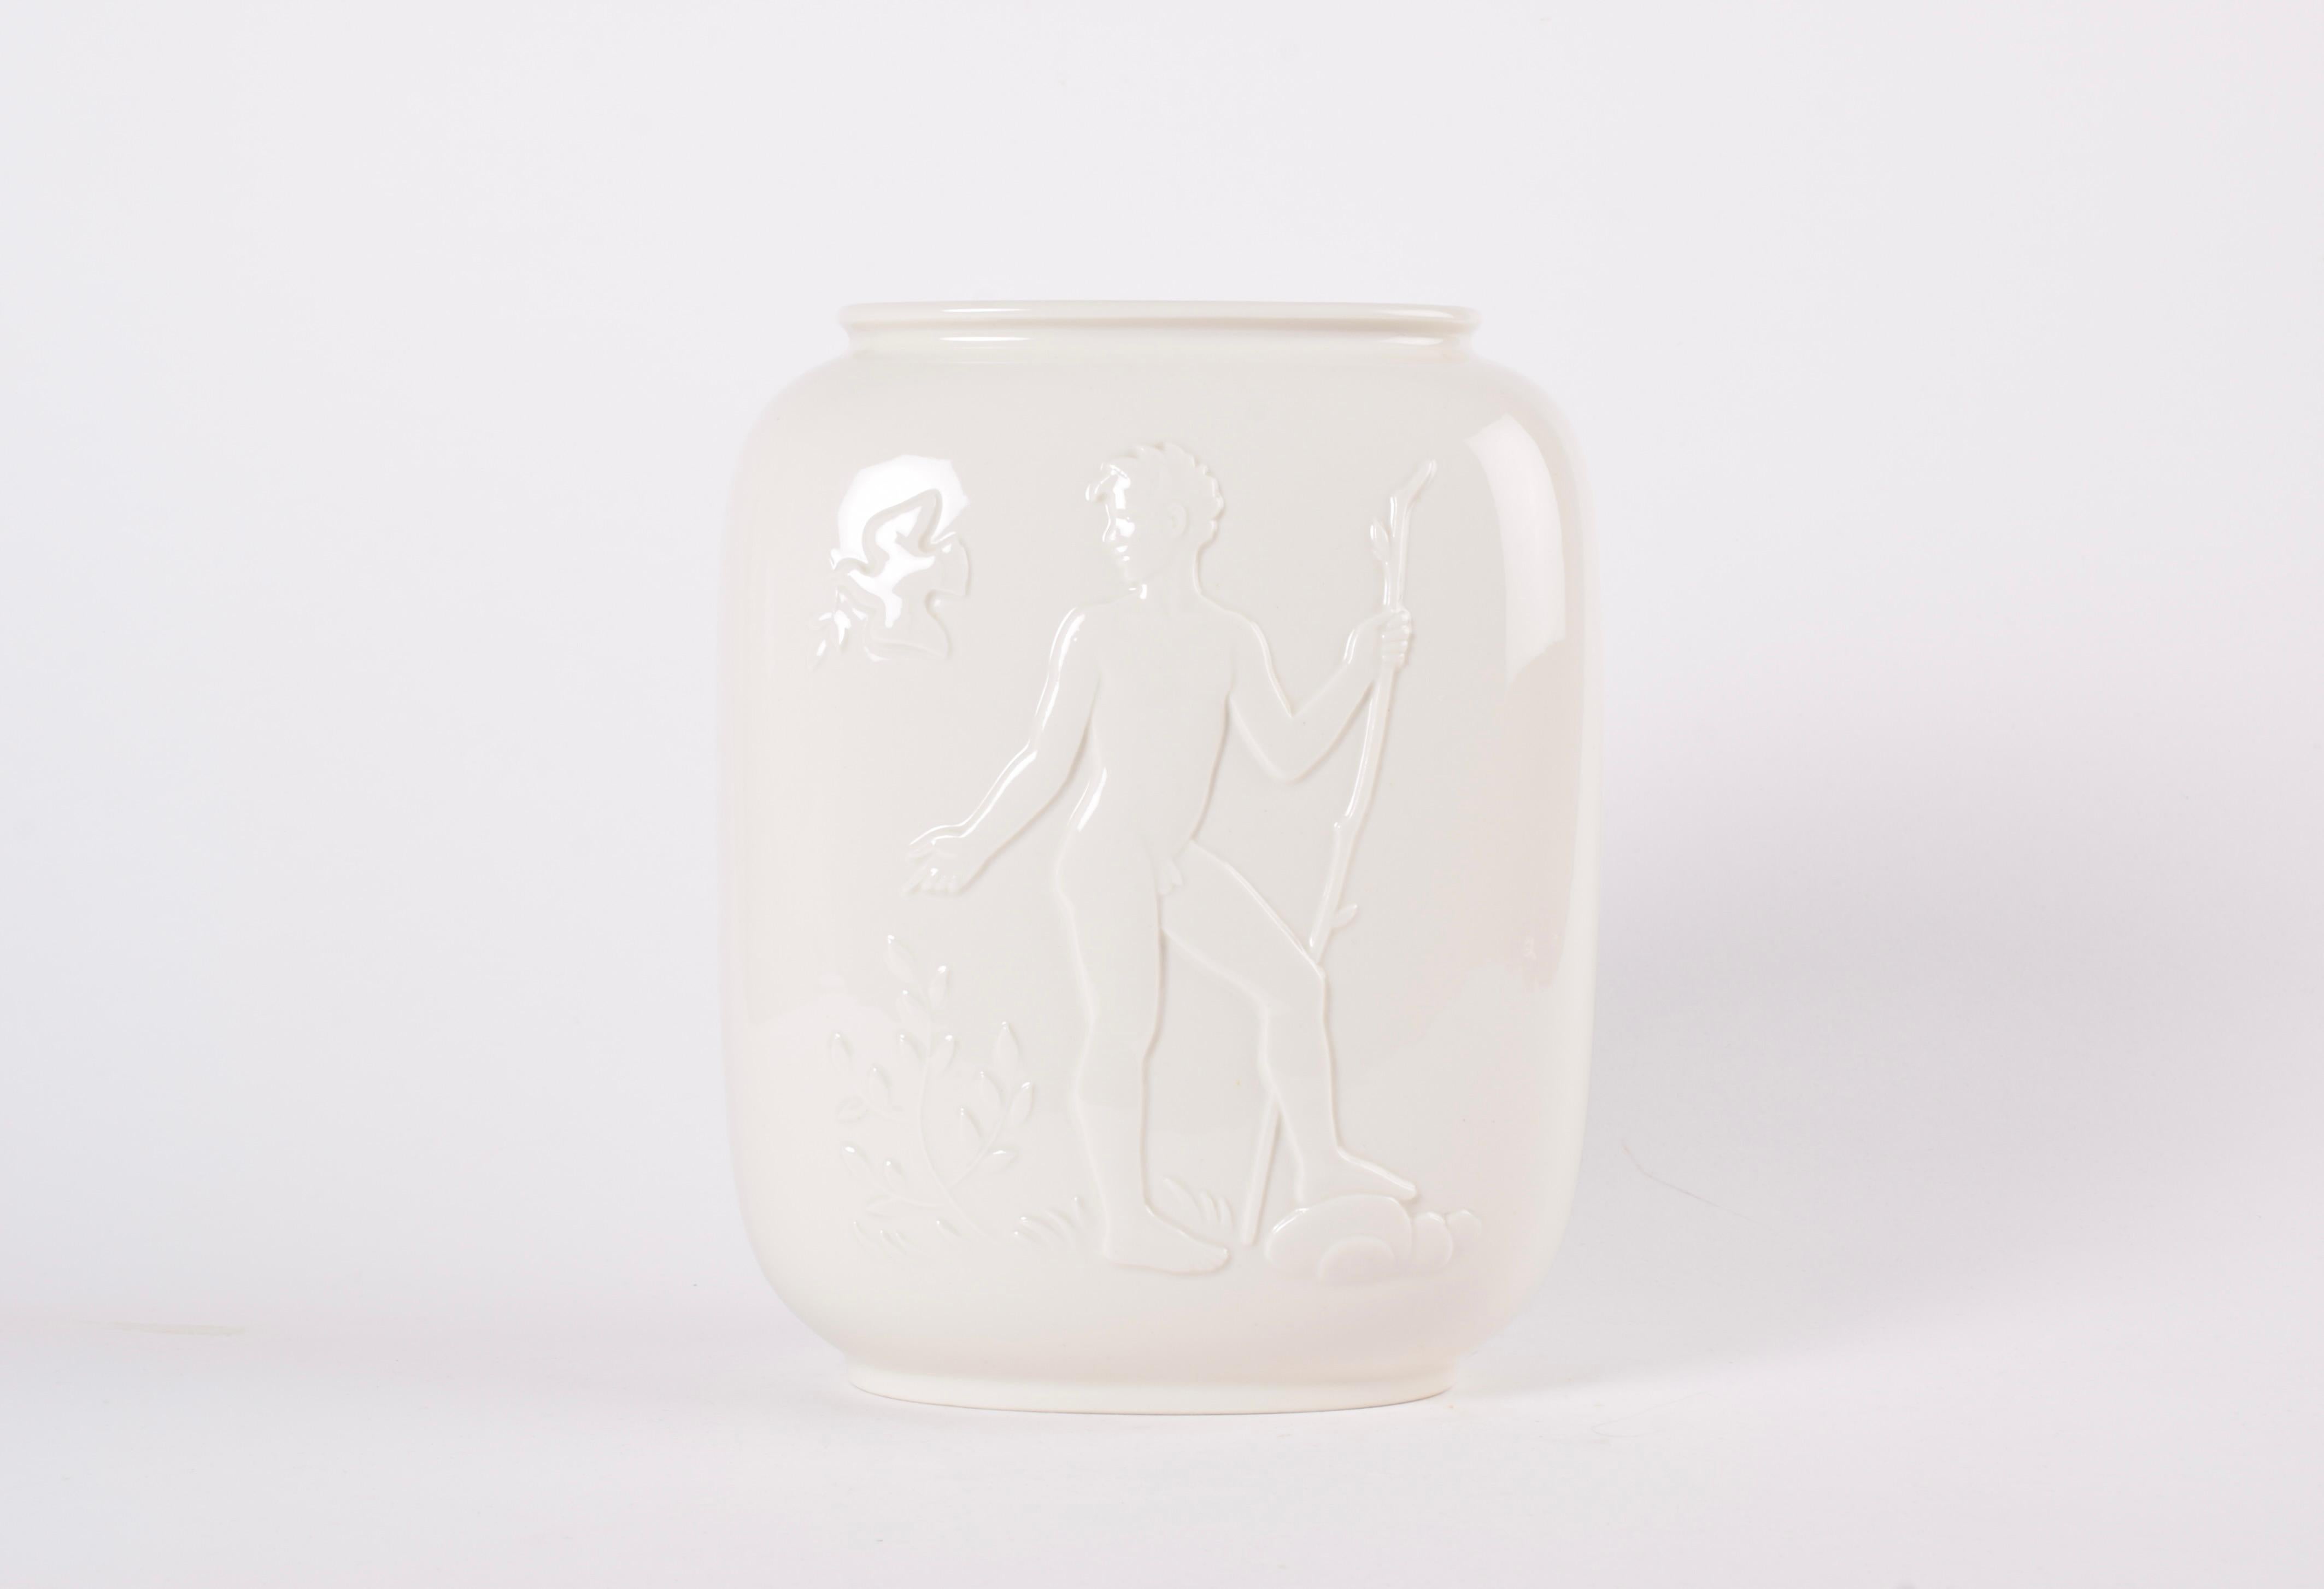 Large Royal Copenhagen Art Deco vase by Hans Henrik Hansen, manufactured 1944. Made from Blanc de Chine.

The vase features a young naked woman and man on either side surrounded by wildlife, Adam and Eve in Paradise. 

Marked under bottom with HHH